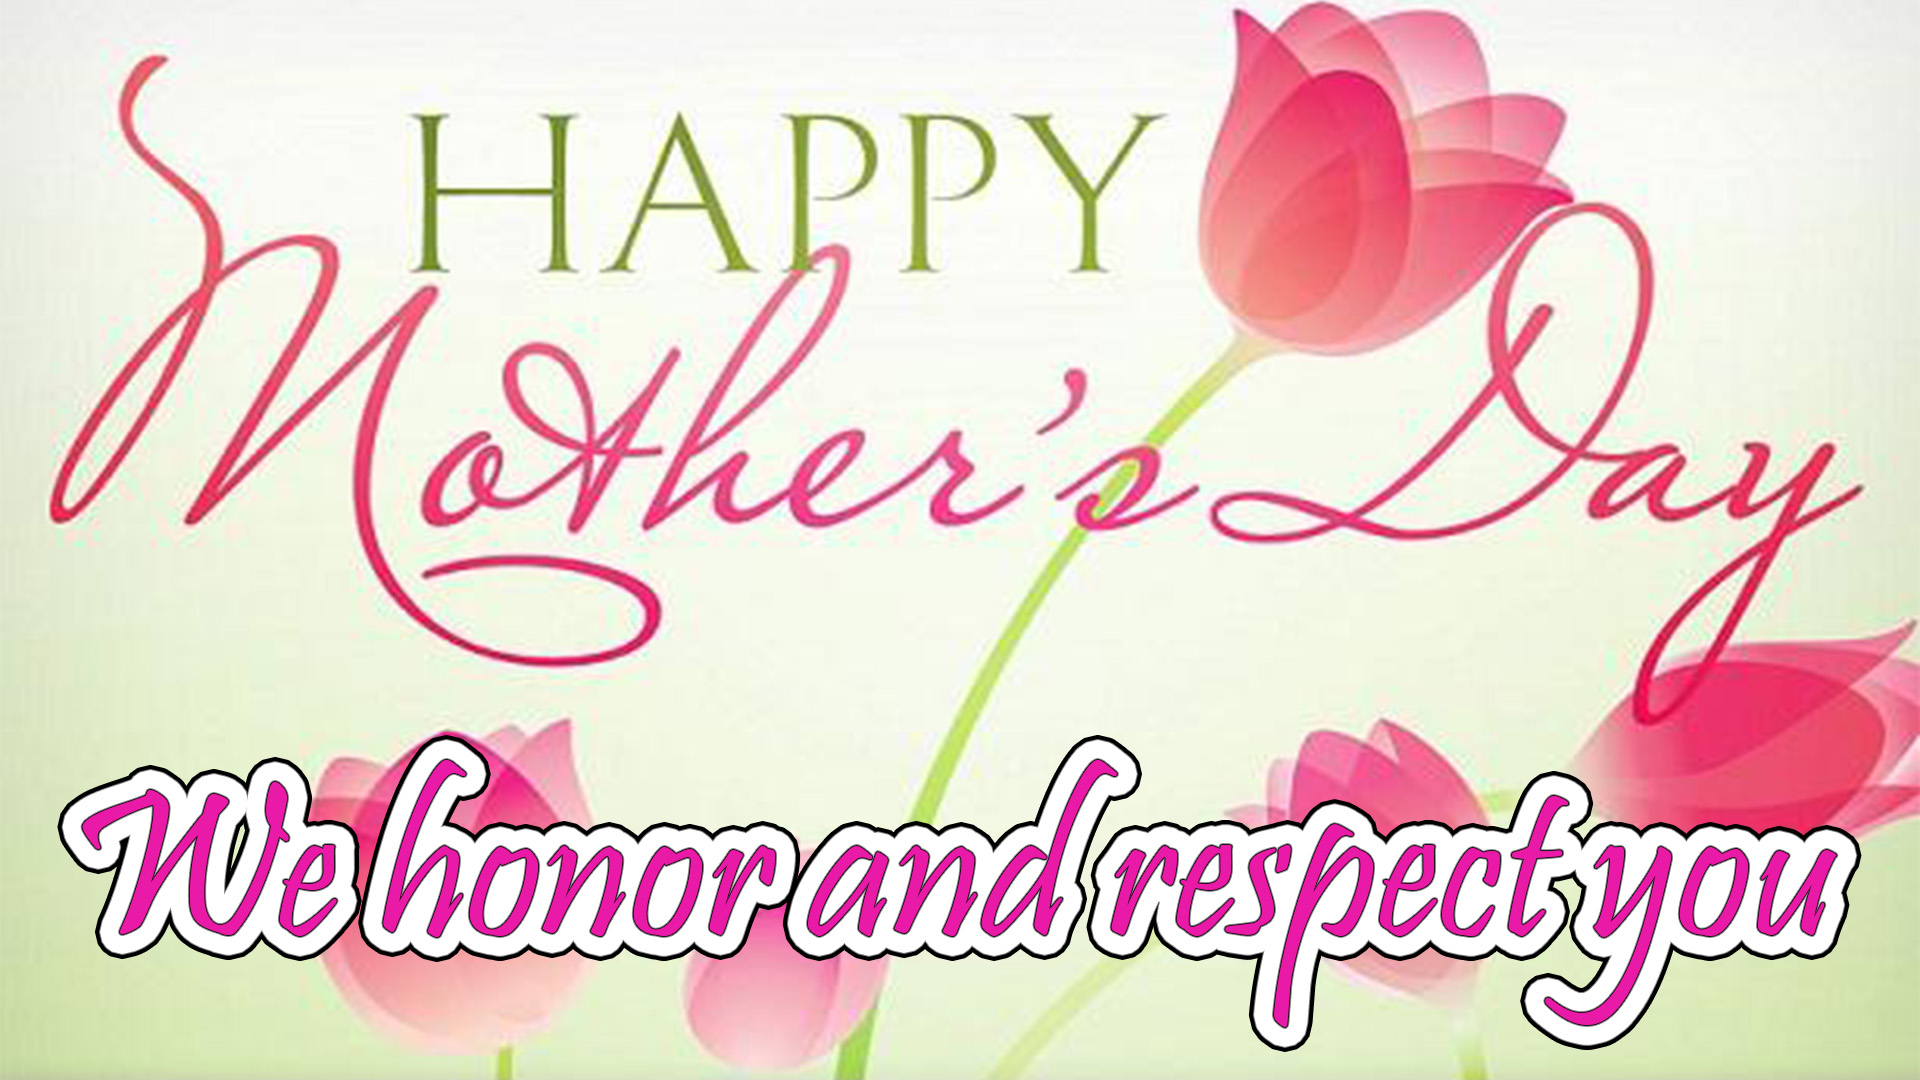 mothers day image